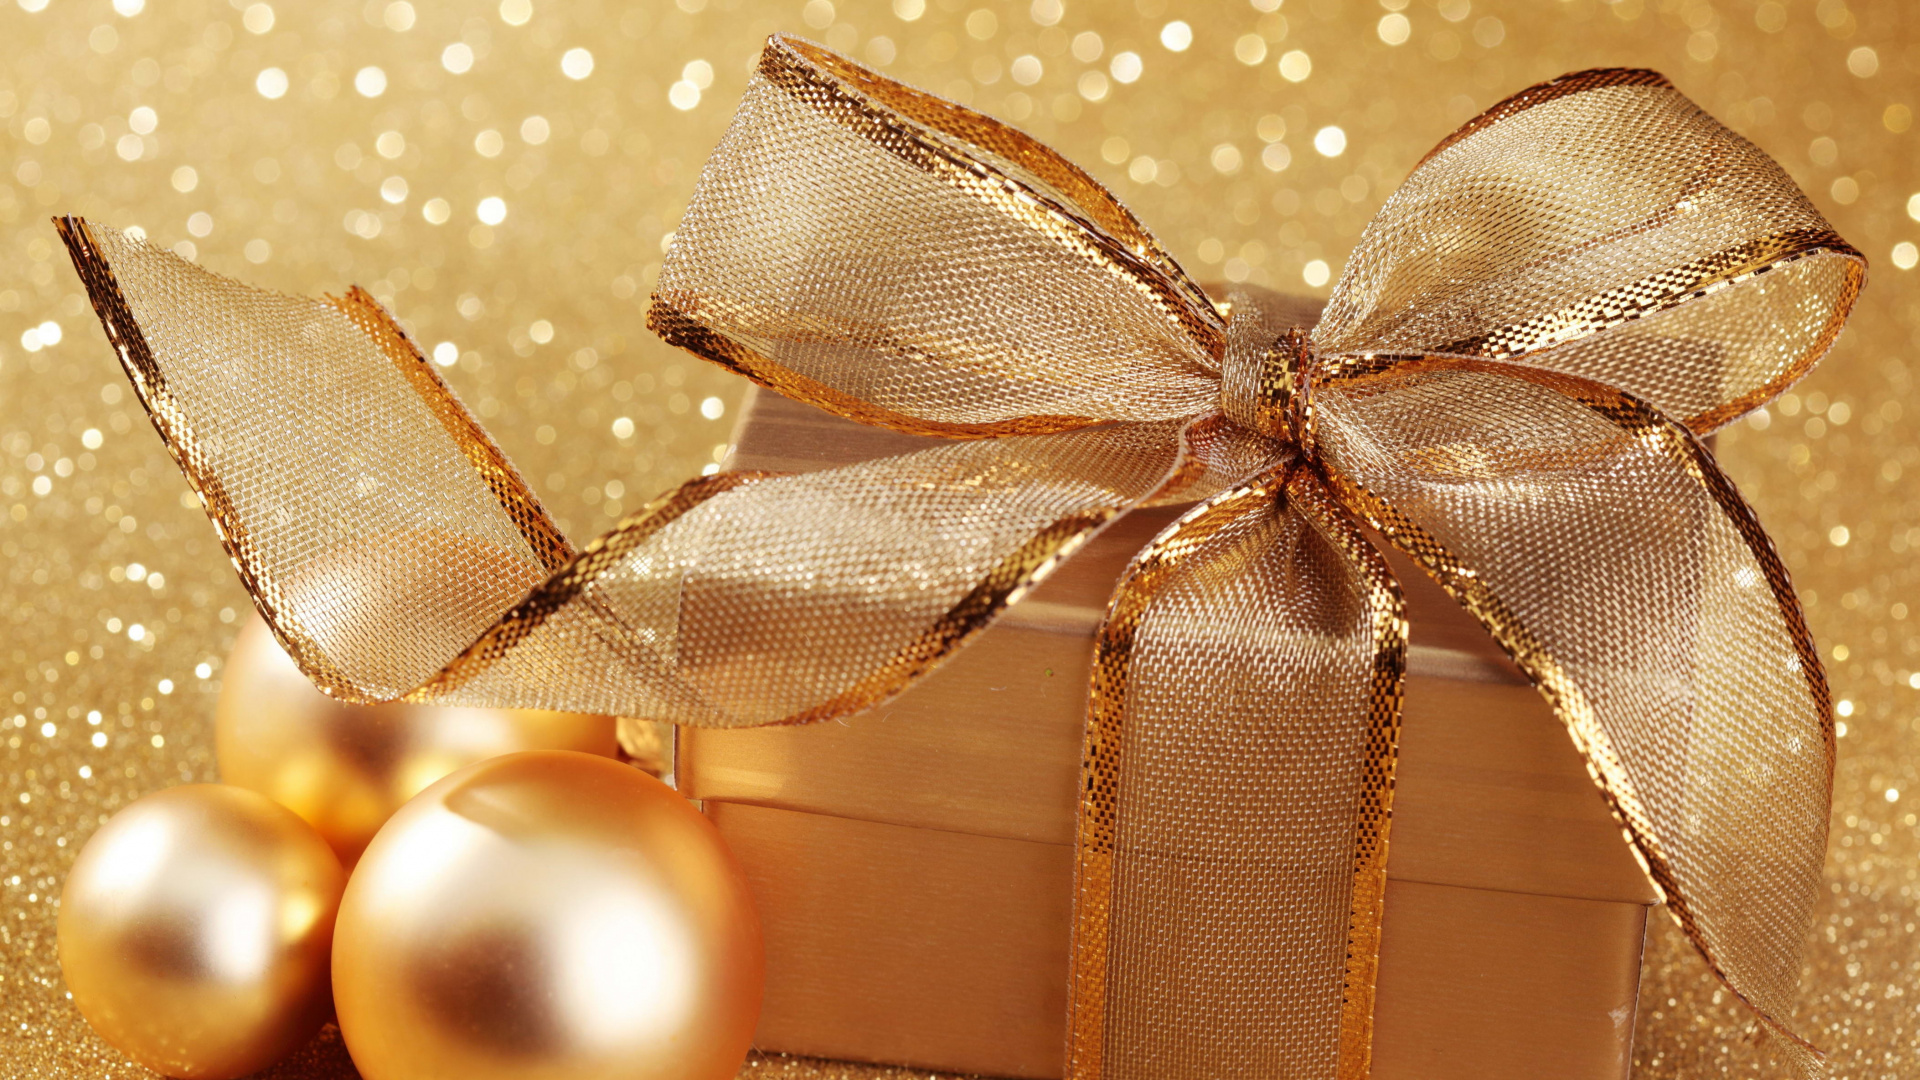 New Year, Christmas Day, Holiday, Ribbon, Present. Wallpaper in 1920x1080 Resolution